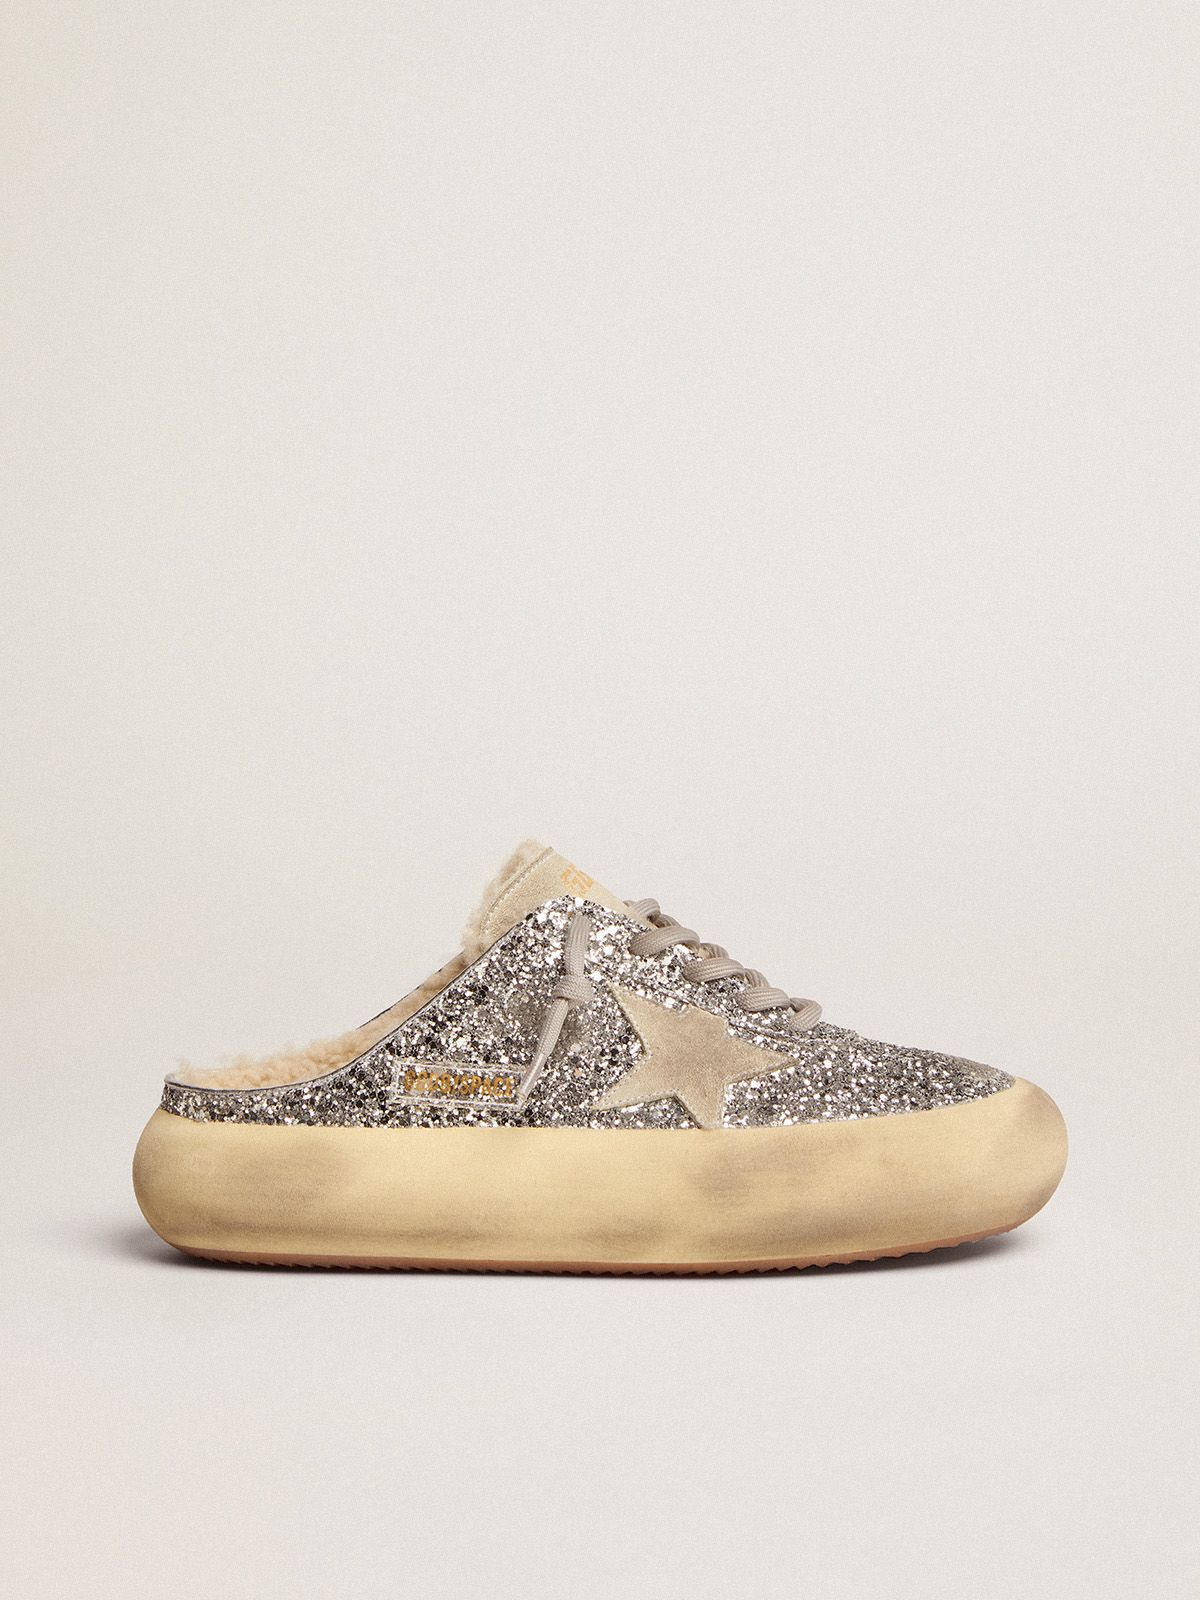 golden goose glitter shoes with shearling Space-Star Sabot silver in lining